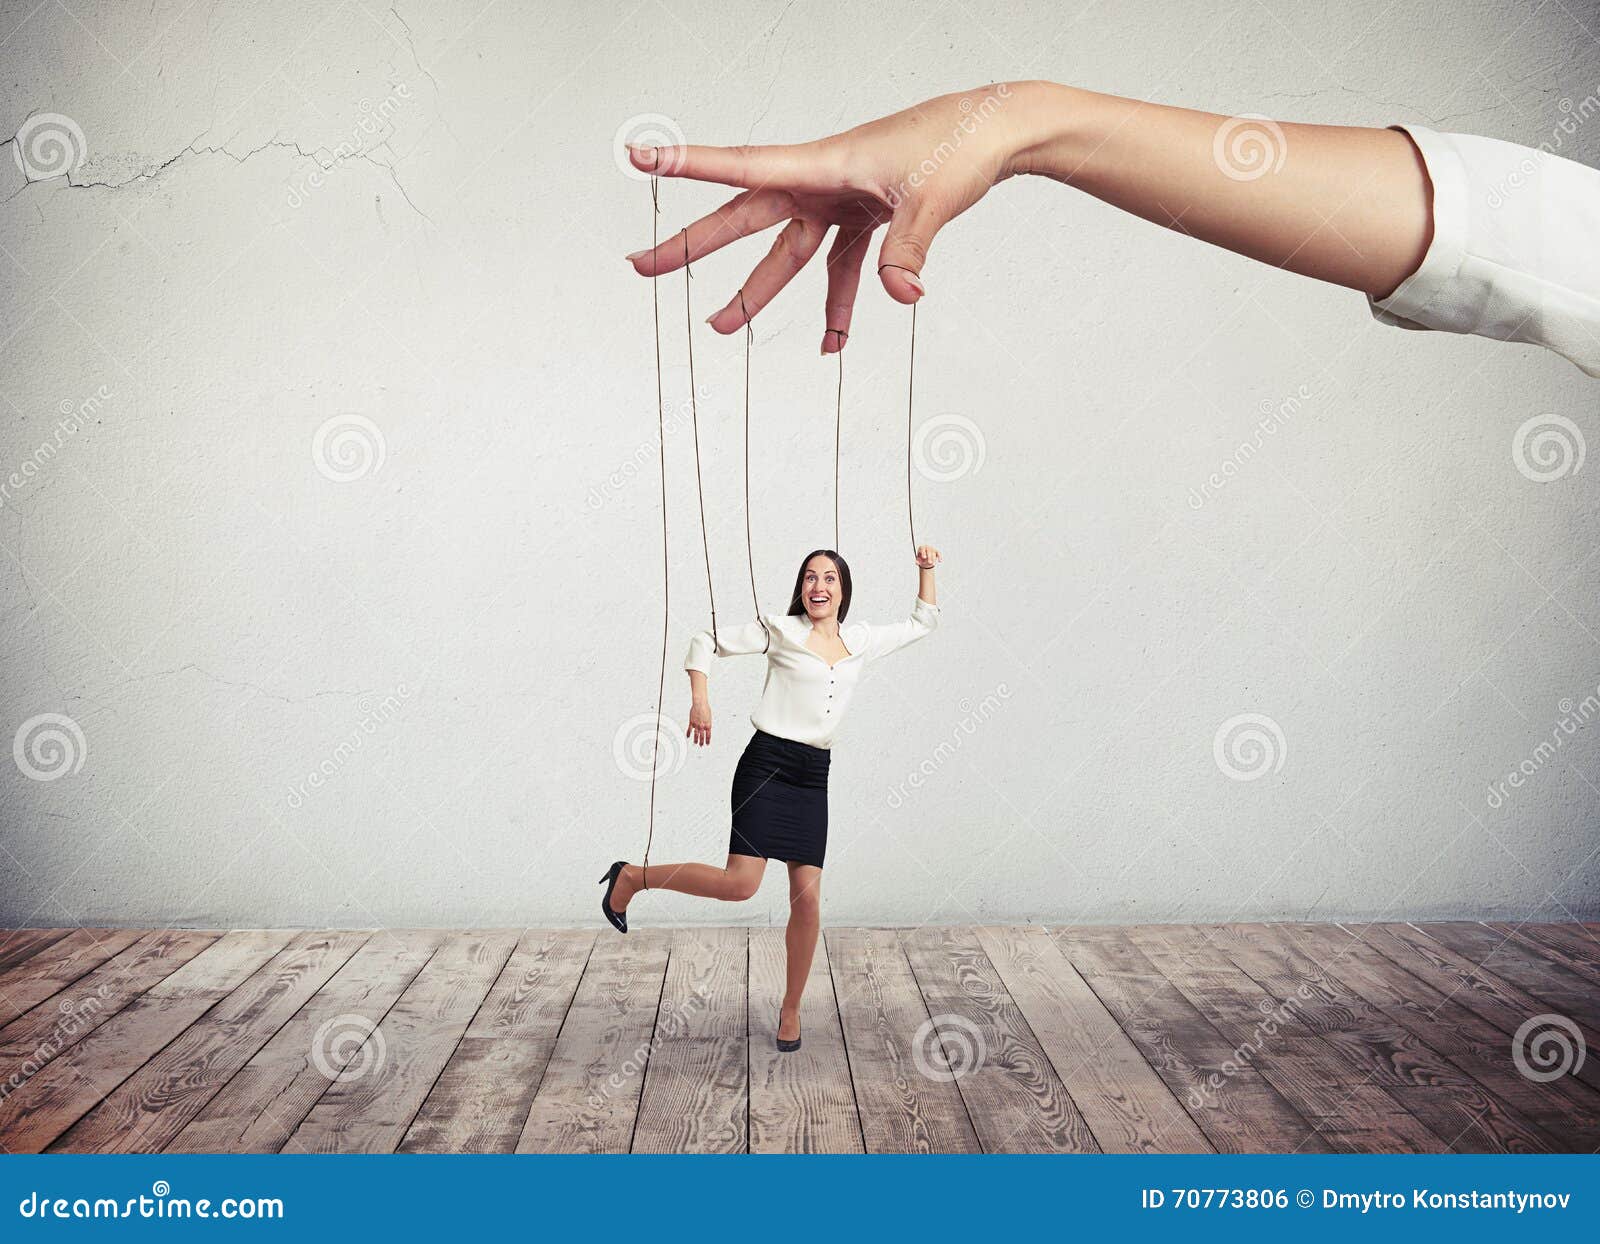 woman looks like a puppet on strings